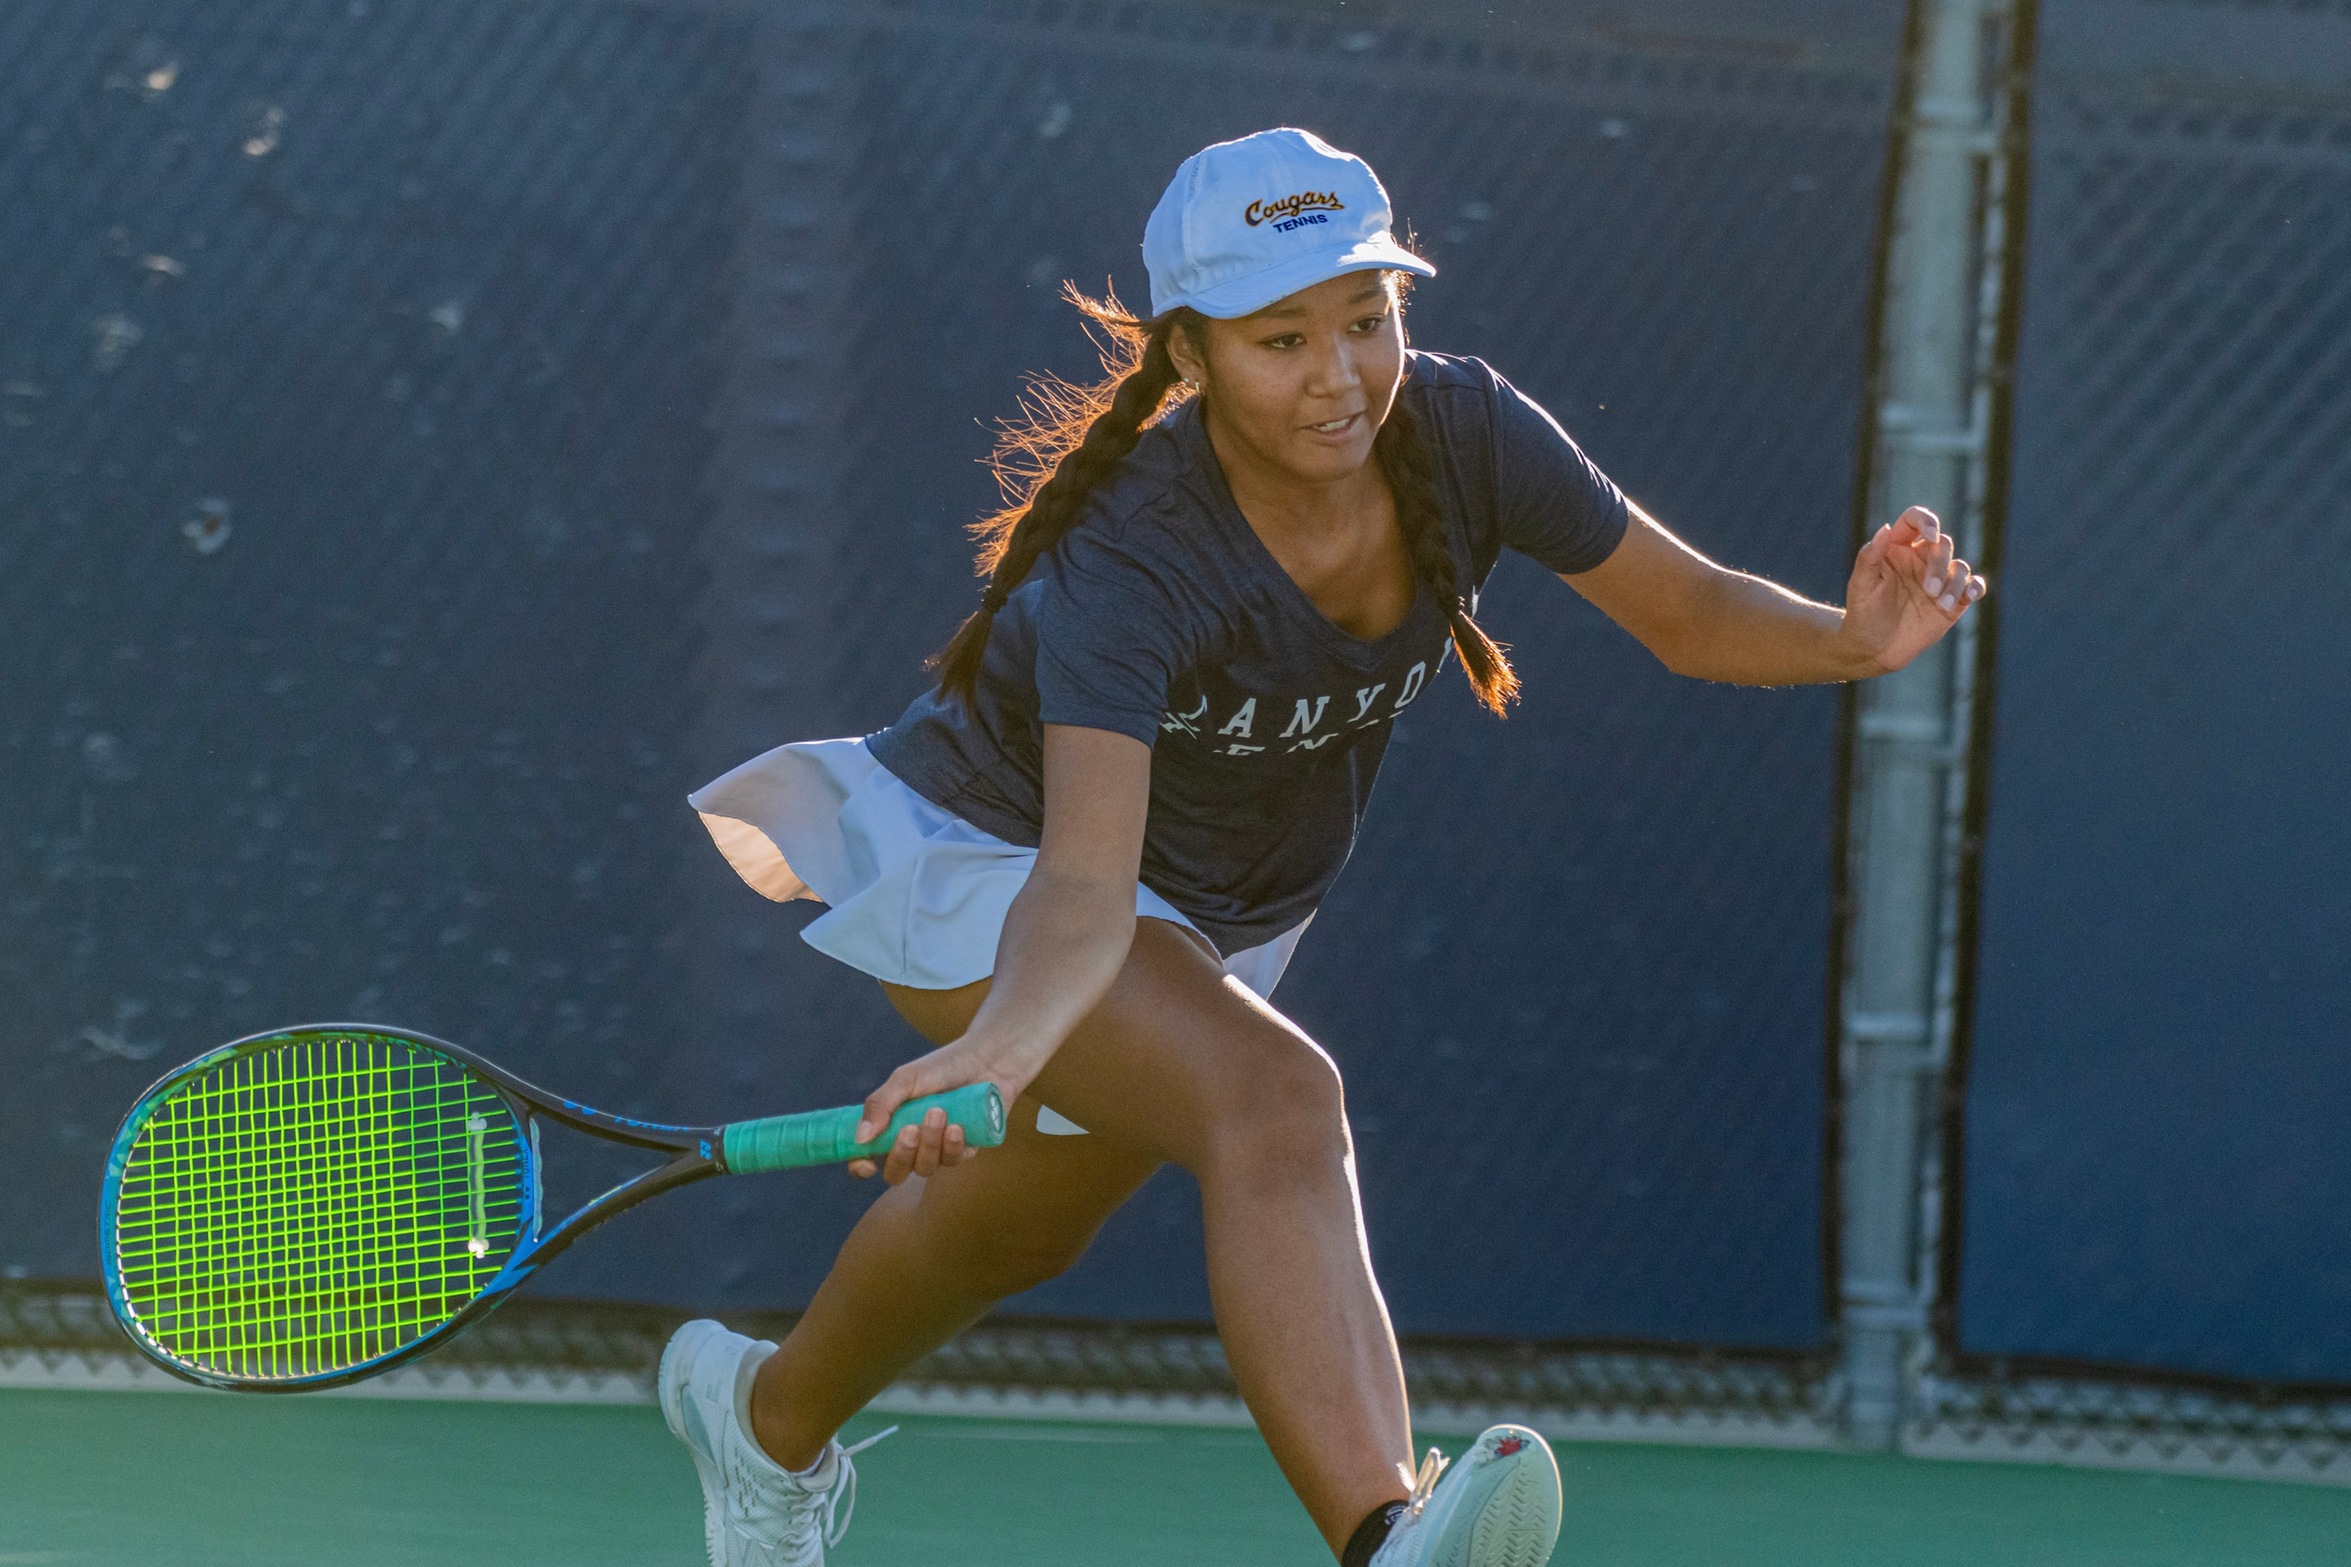 College of the Canyons women's tennis stock image of Ellie Wingo.